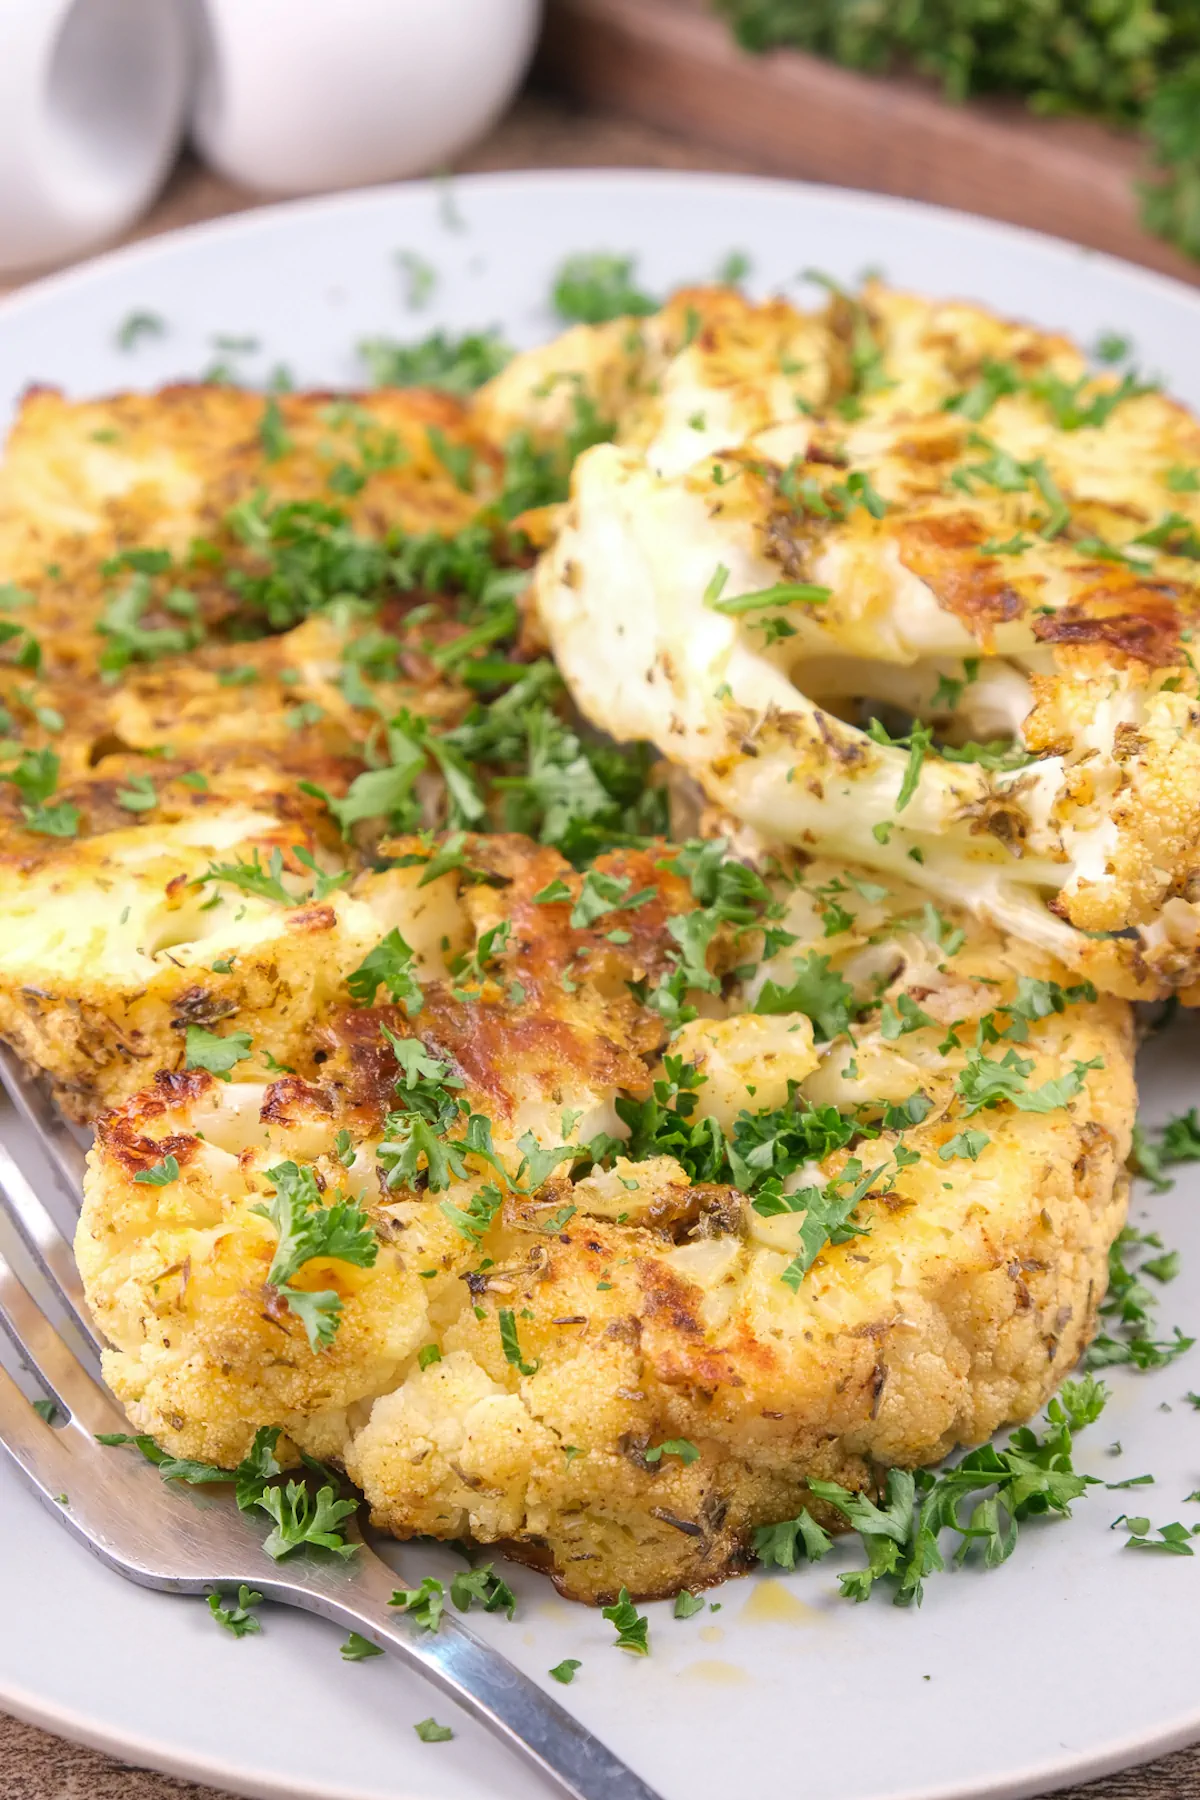 A focused shot of cauliflower steak with coated with flavorful Creole-spiced butter.